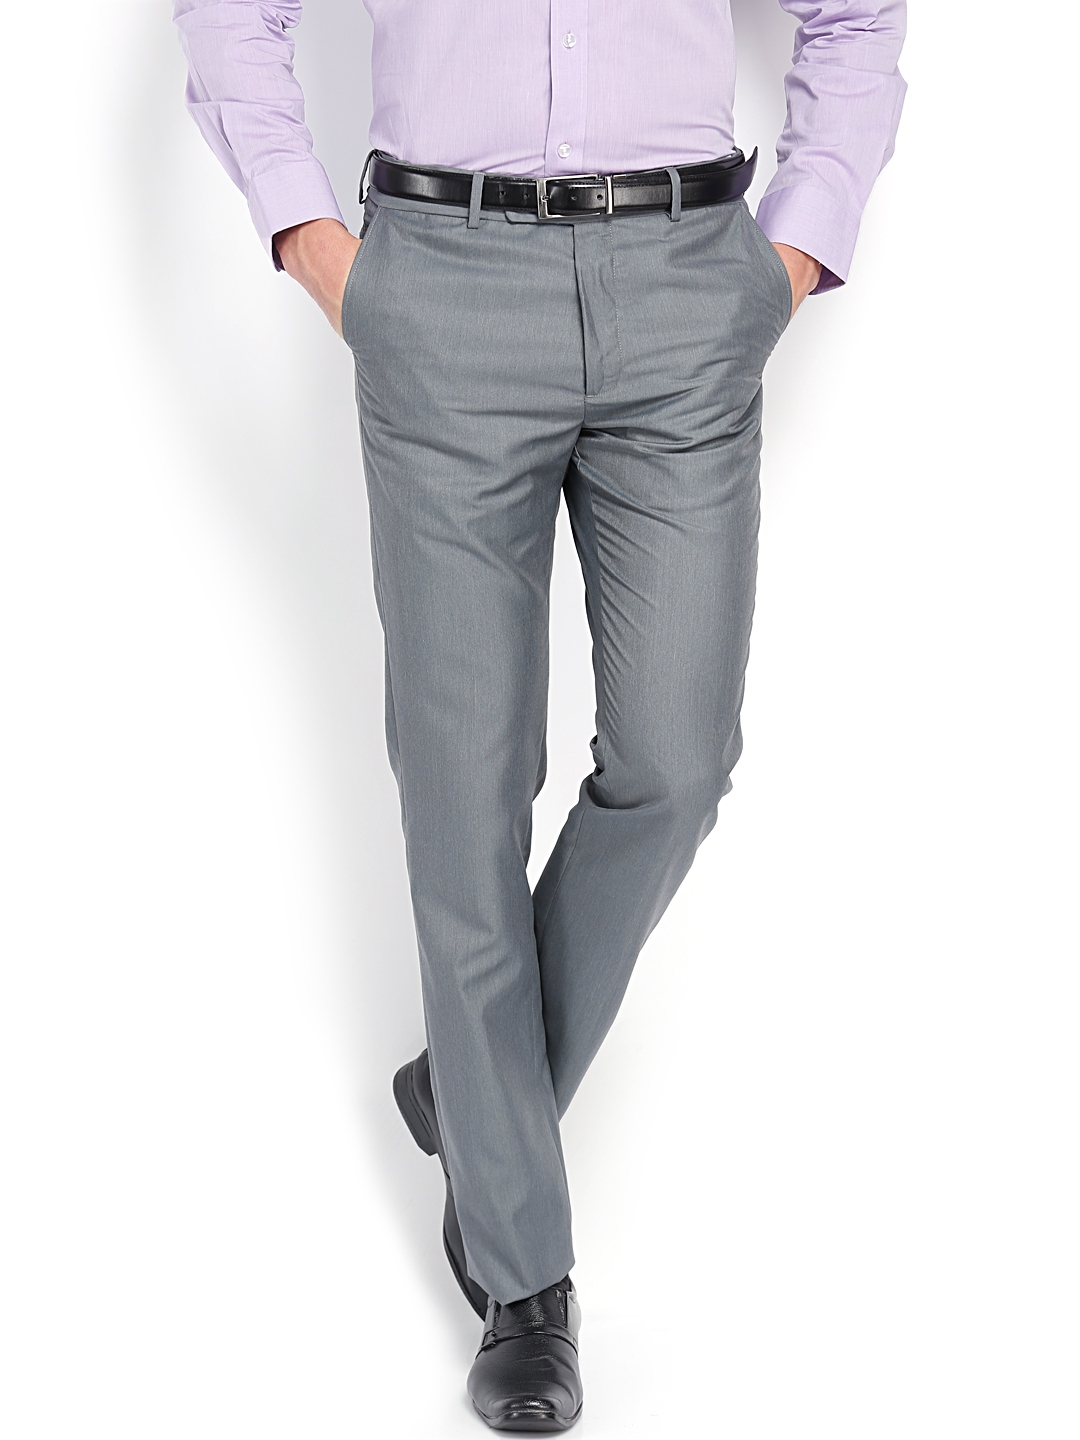 Buy LP ATHWORK Checks Polyester Viscose Tapered Fit Mens Work Wear  Trousers  Shoppers Stop